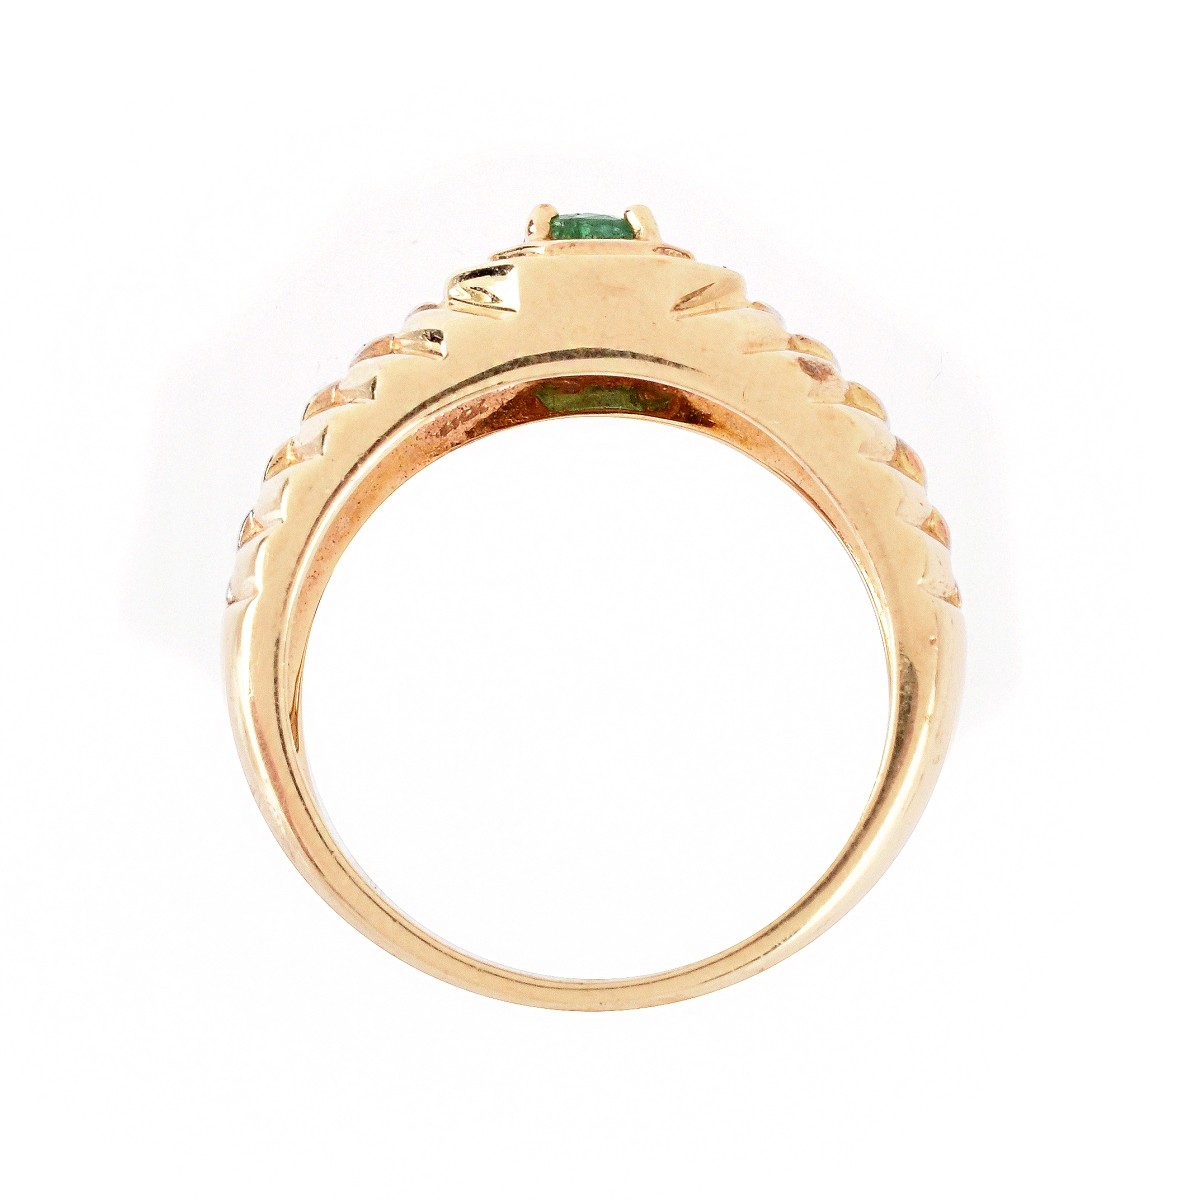 Man's Vintage Emerald and 14K Ring